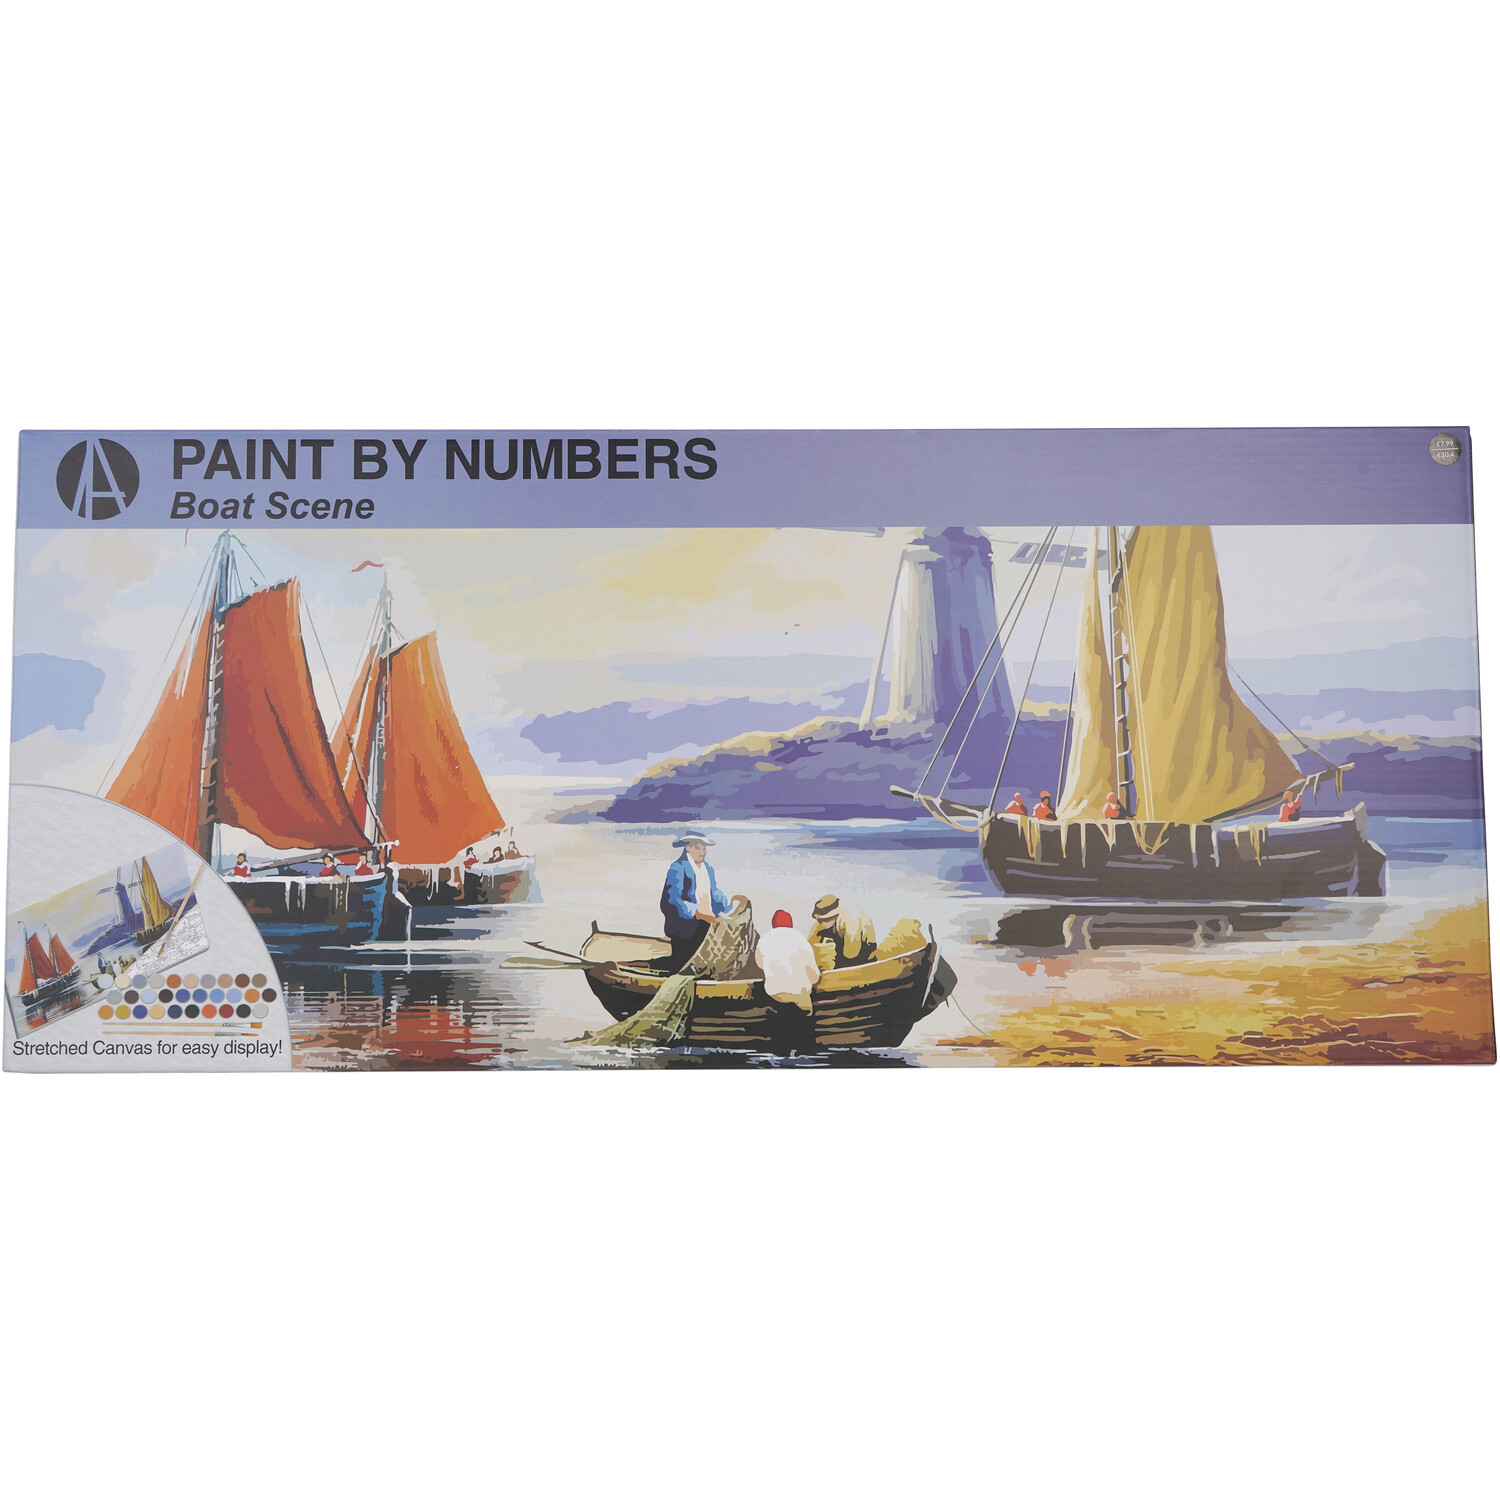 Paint by Numbers Boat Scene Image 1